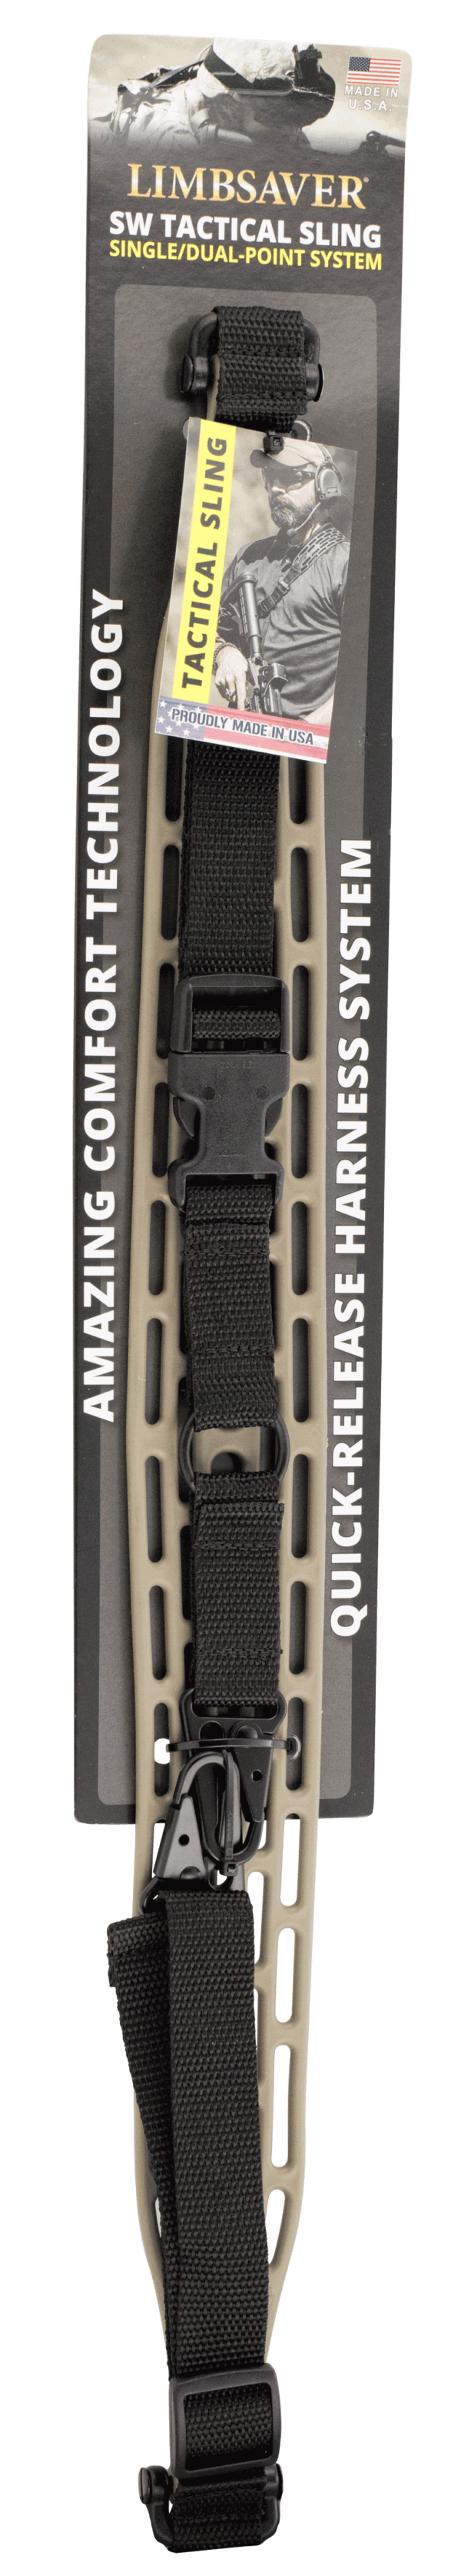 ProMag PM140B Sling Attachment Plate Single Point Black Oxide Steel